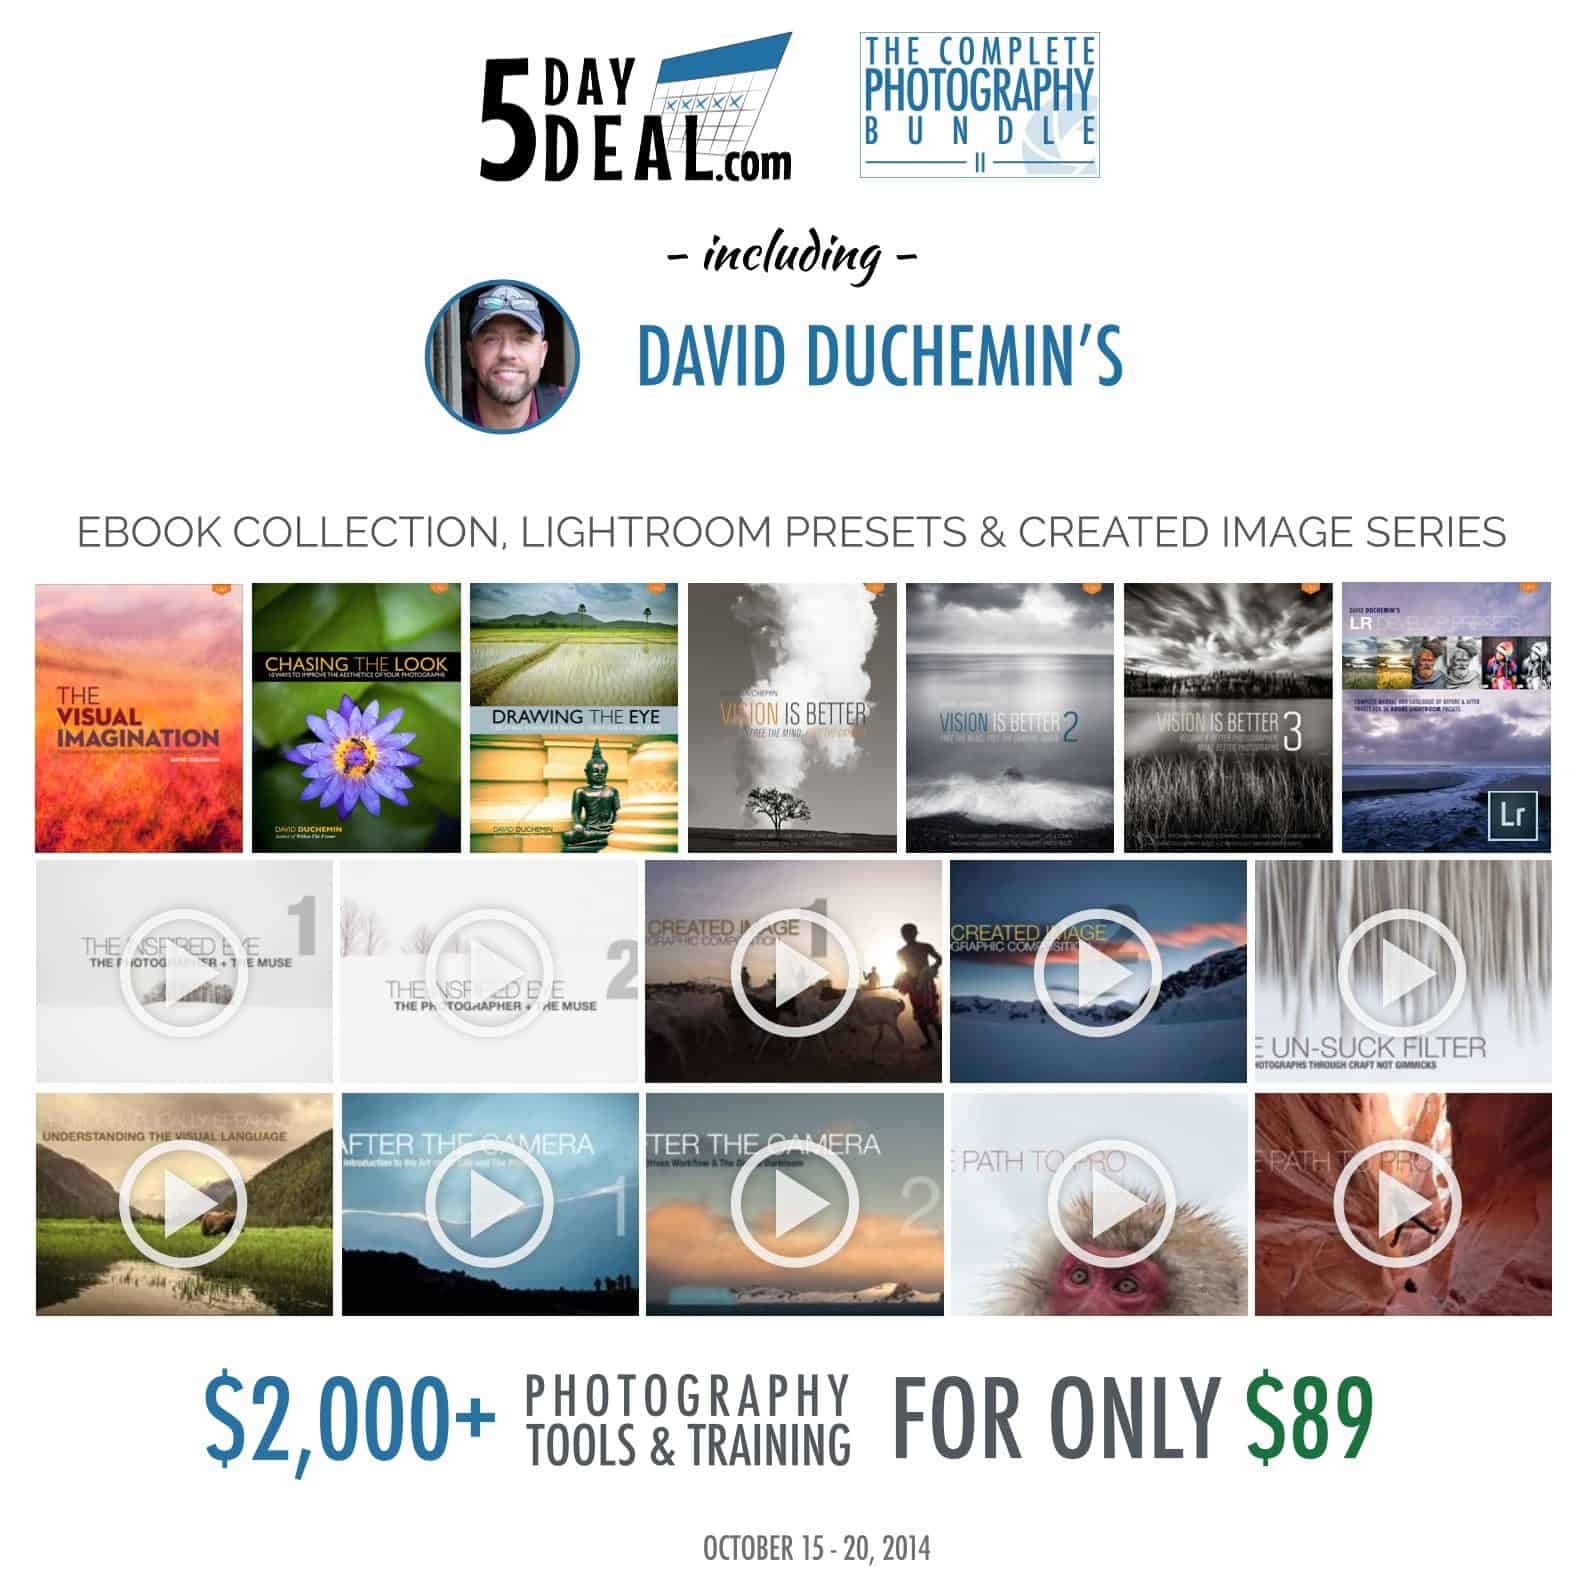 Complete Photography Bundle Helping You & Charity!